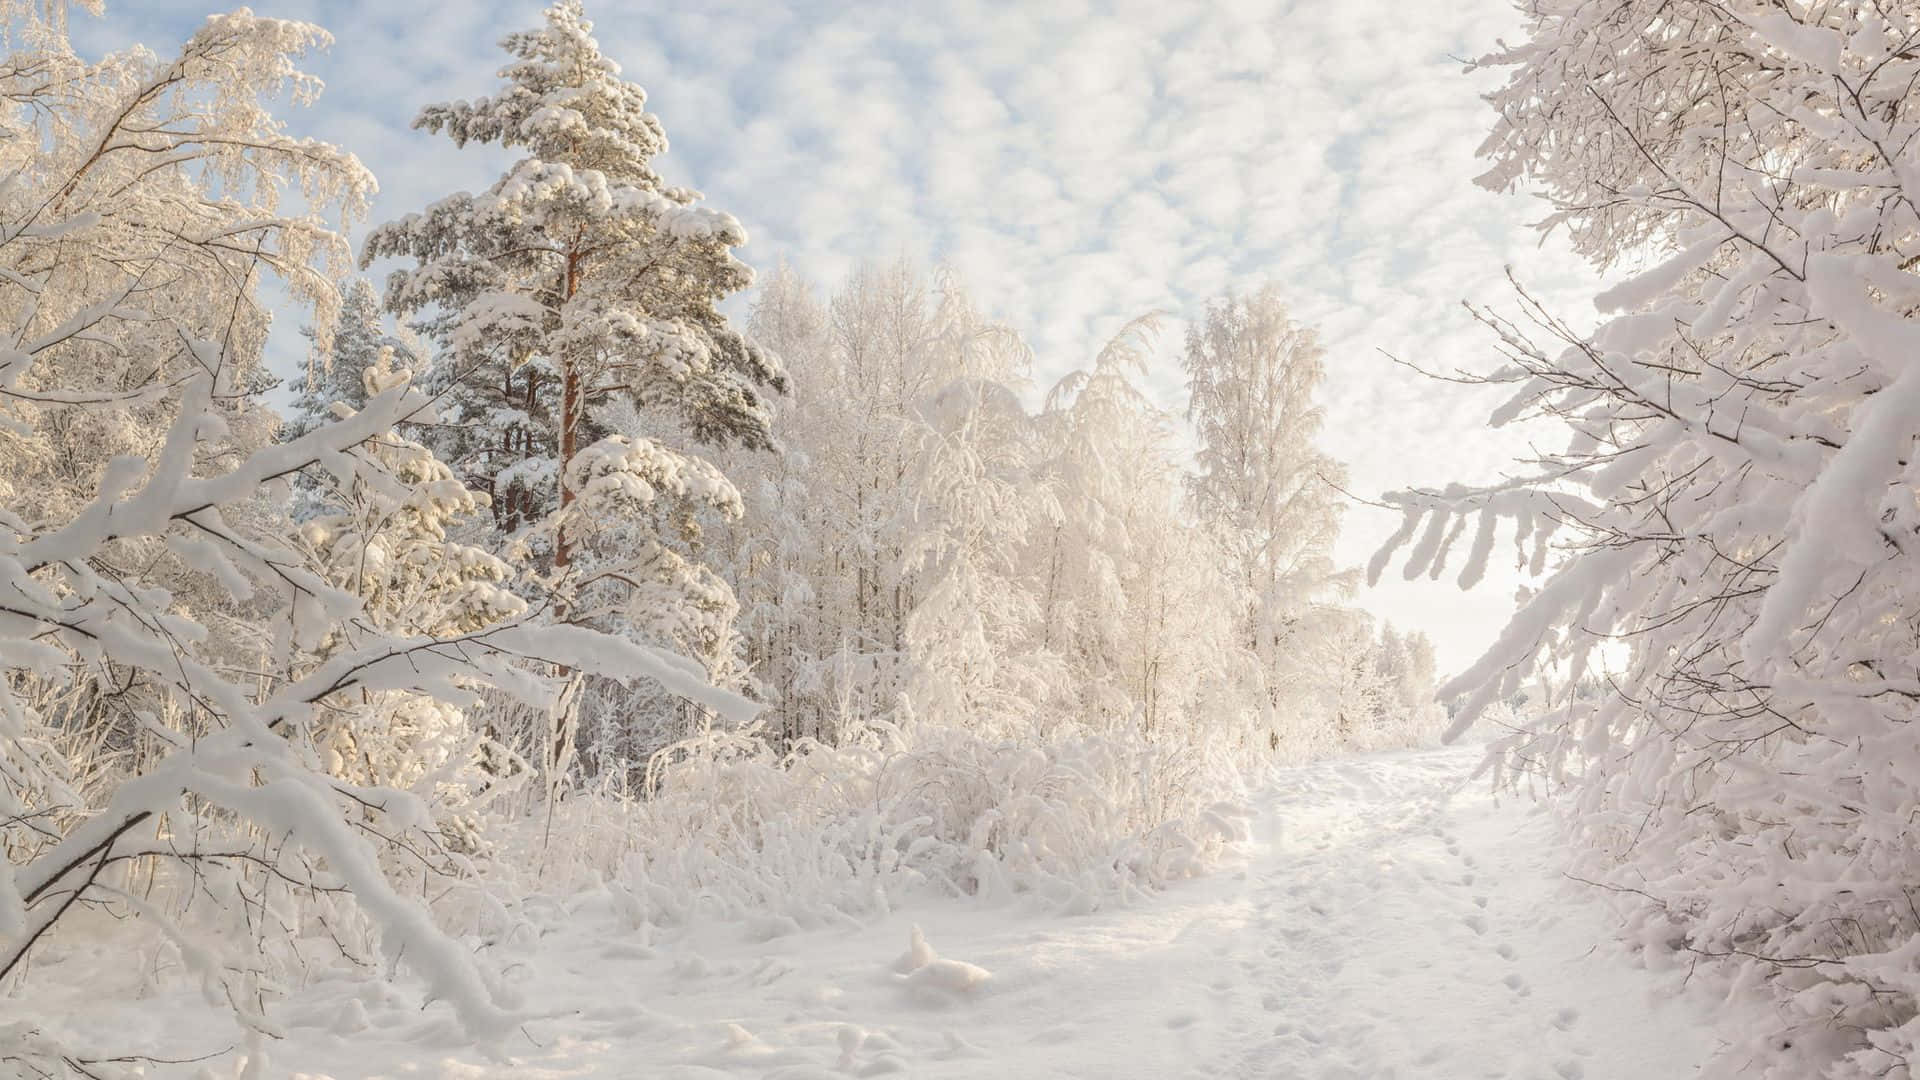 Enjoy the tranquility of the snow-covered New Hampshire paths Wallpaper